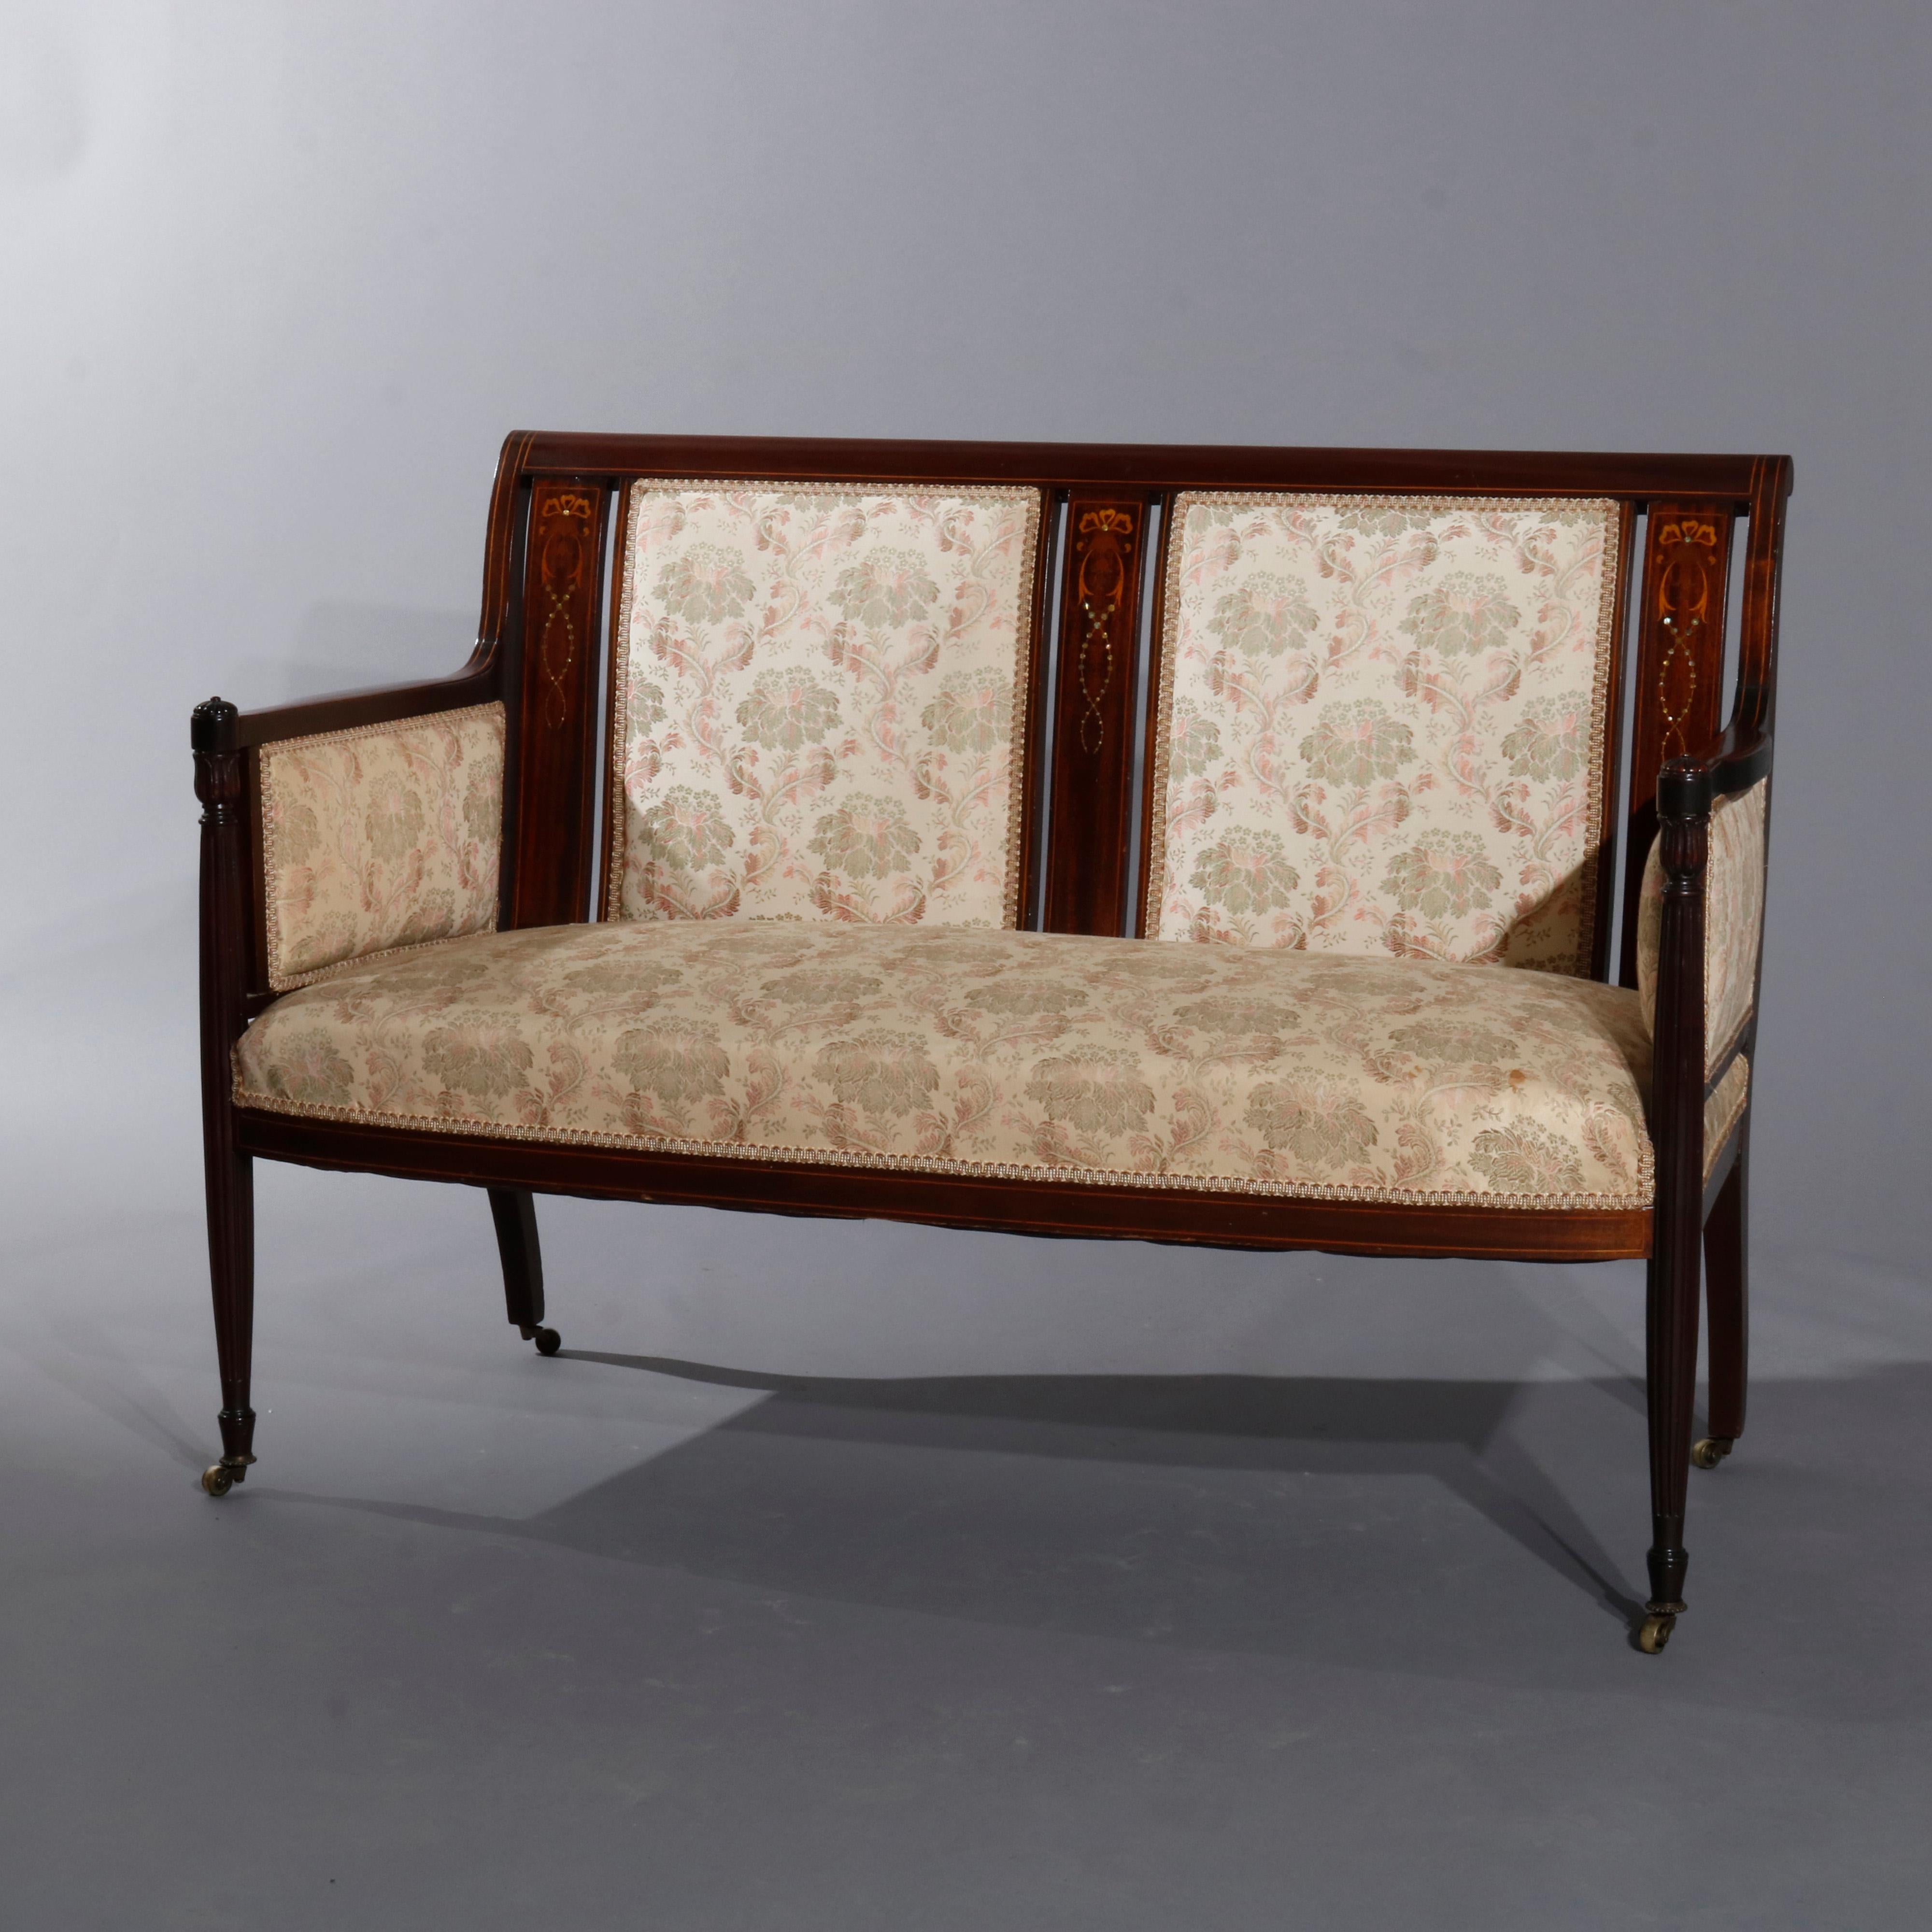 An antique English parlor set includes settle, armchair and side chair offering carved and marquestry mahogany frames with splat back having foliate, scroll and bow satinwood inlay decoration; seats, backs and arms upholstered, circa